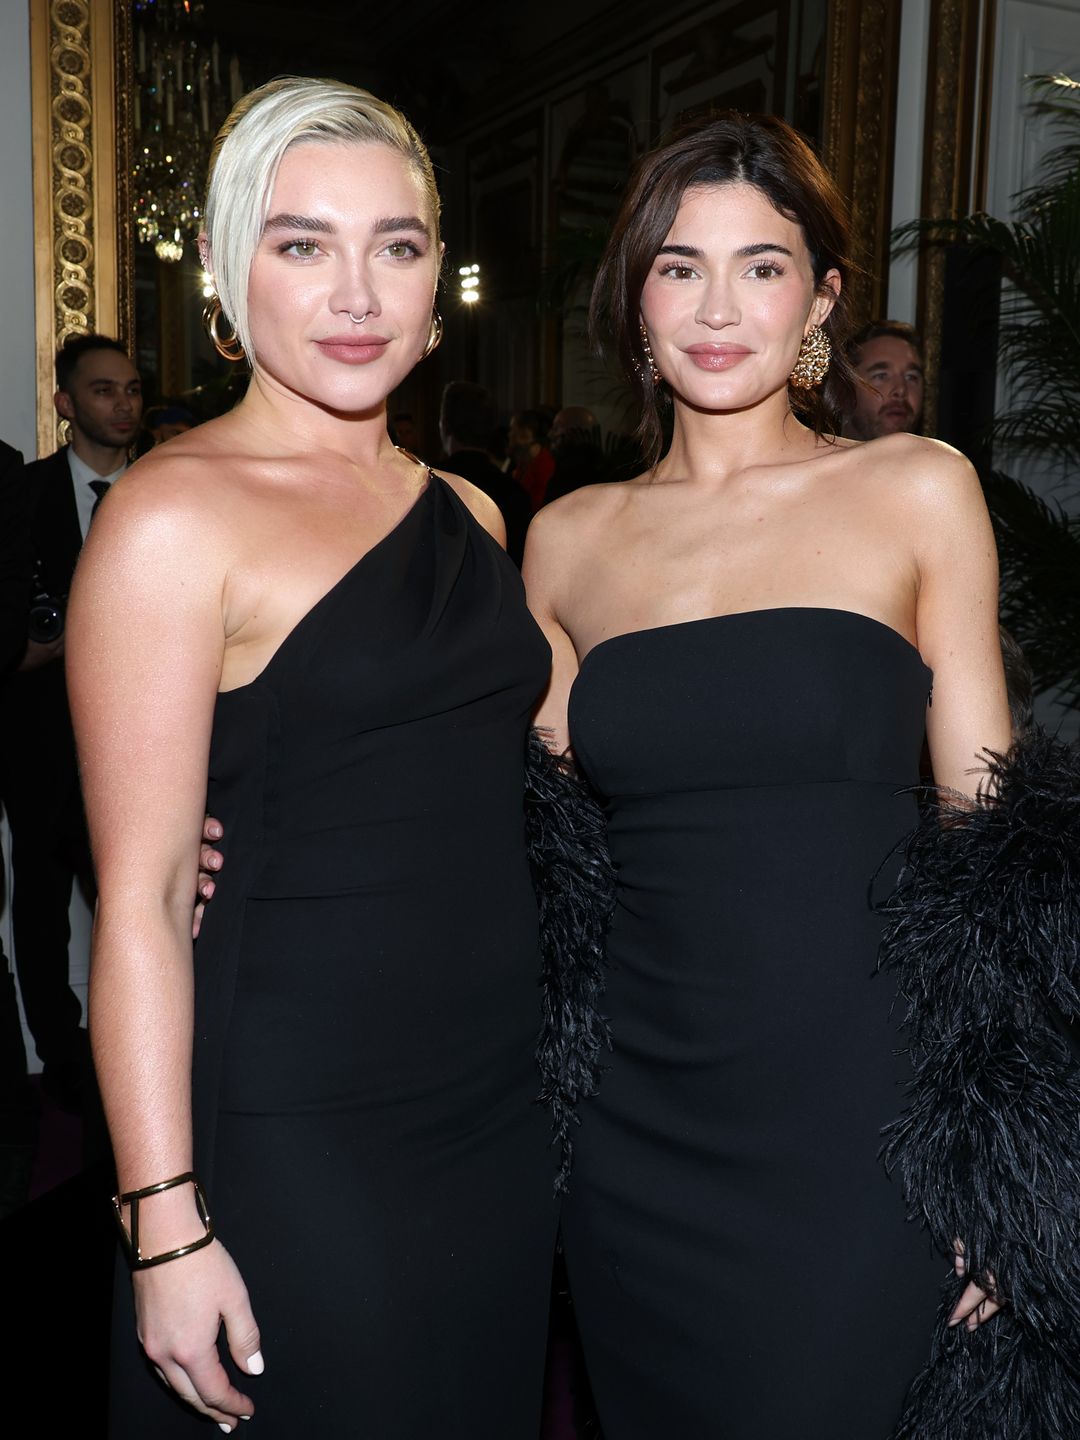 Florence Pugh and Kylie Jenner attend the Valentino Haute Couture Spring/Summer show in paris wearing matching black gowns 